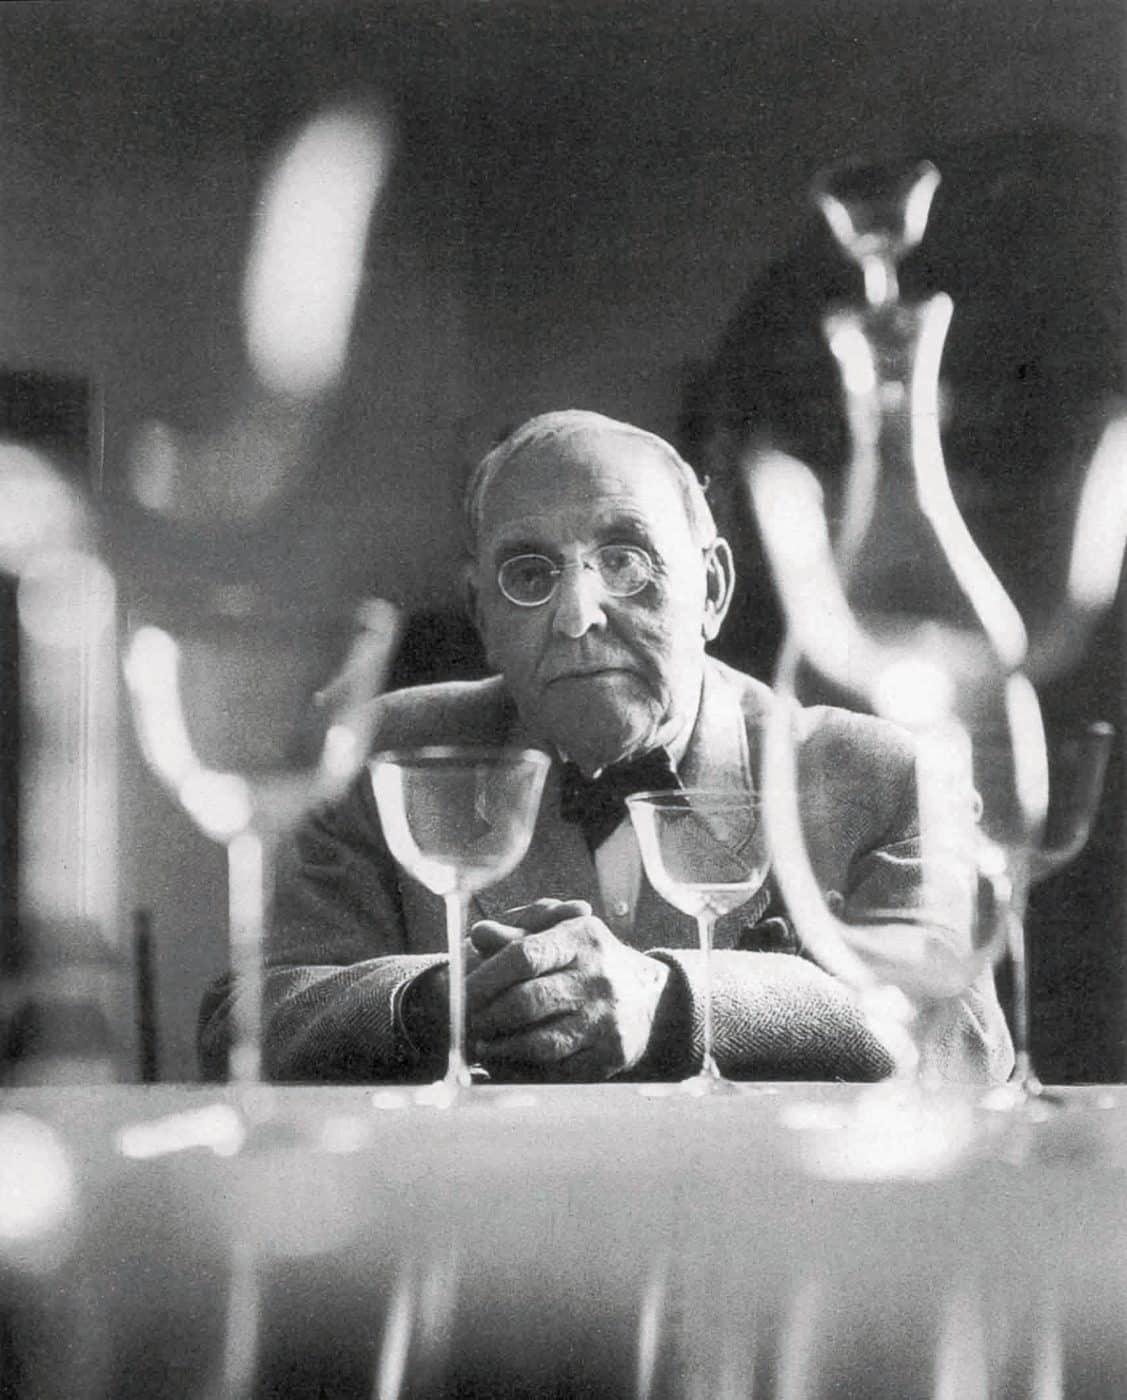 Black and white portrait of Josef Hoffmann in 1954